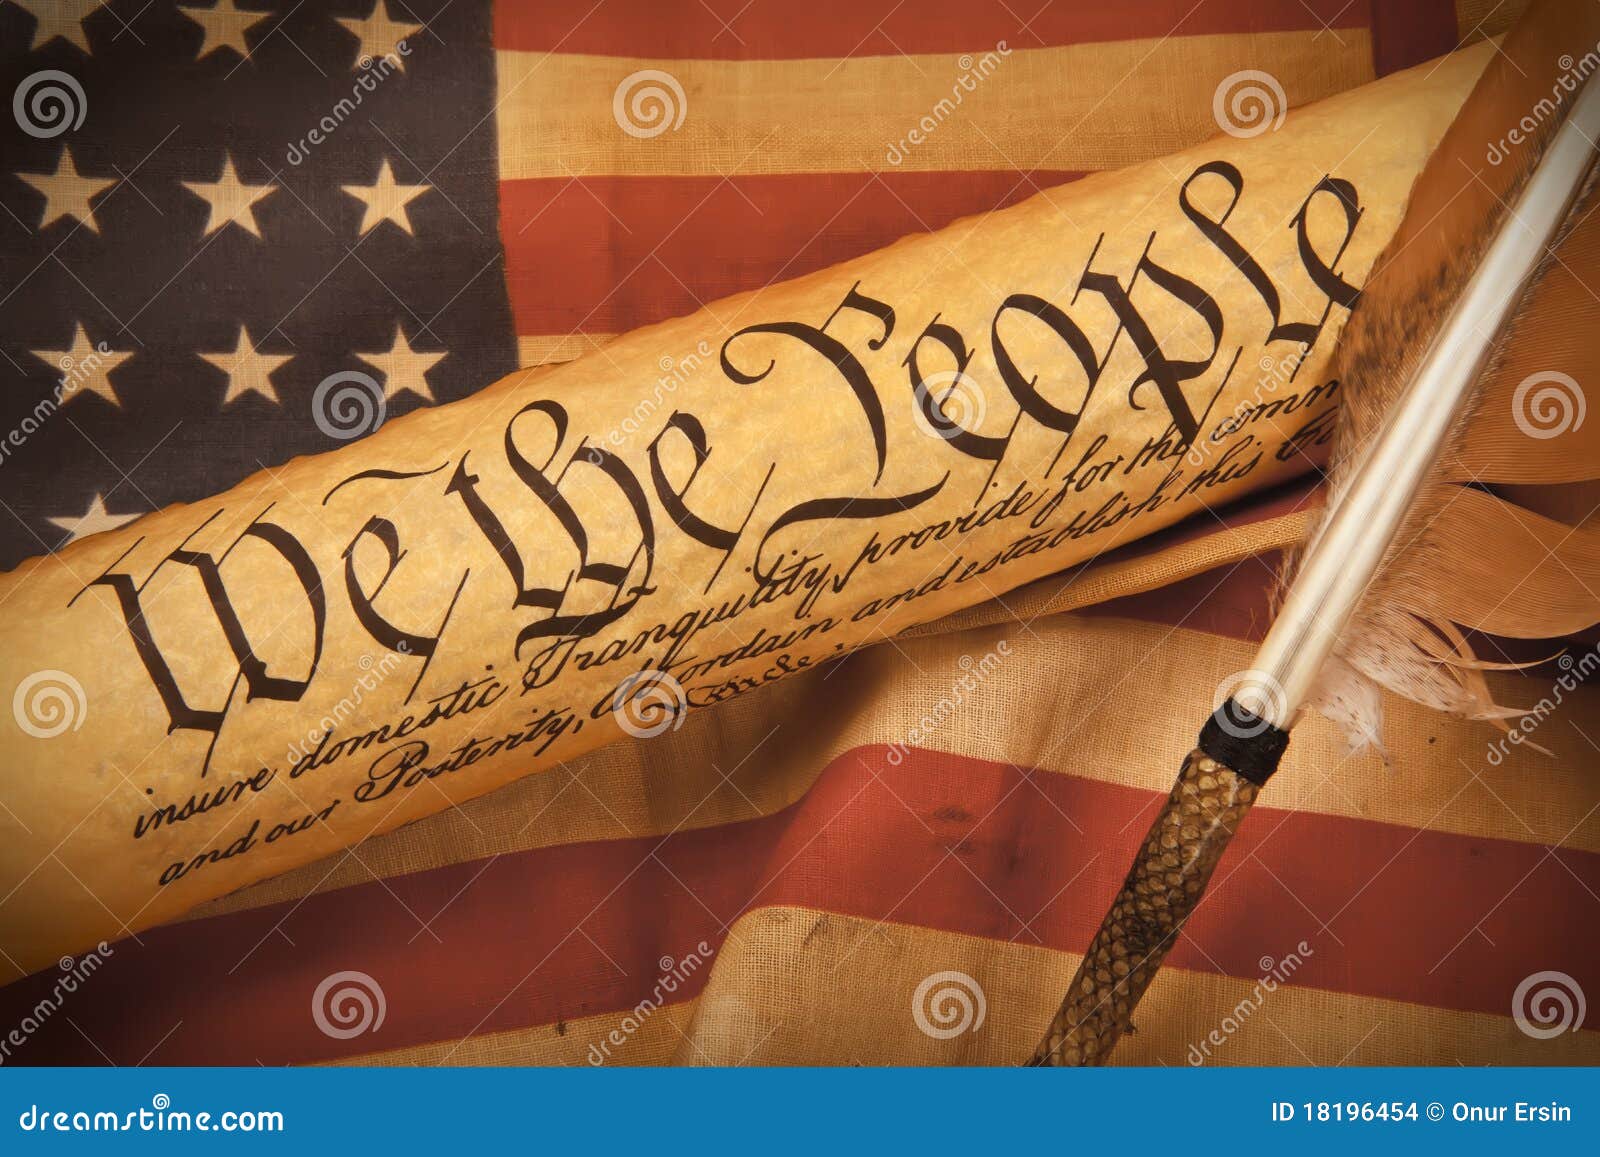 us constitution - we the people